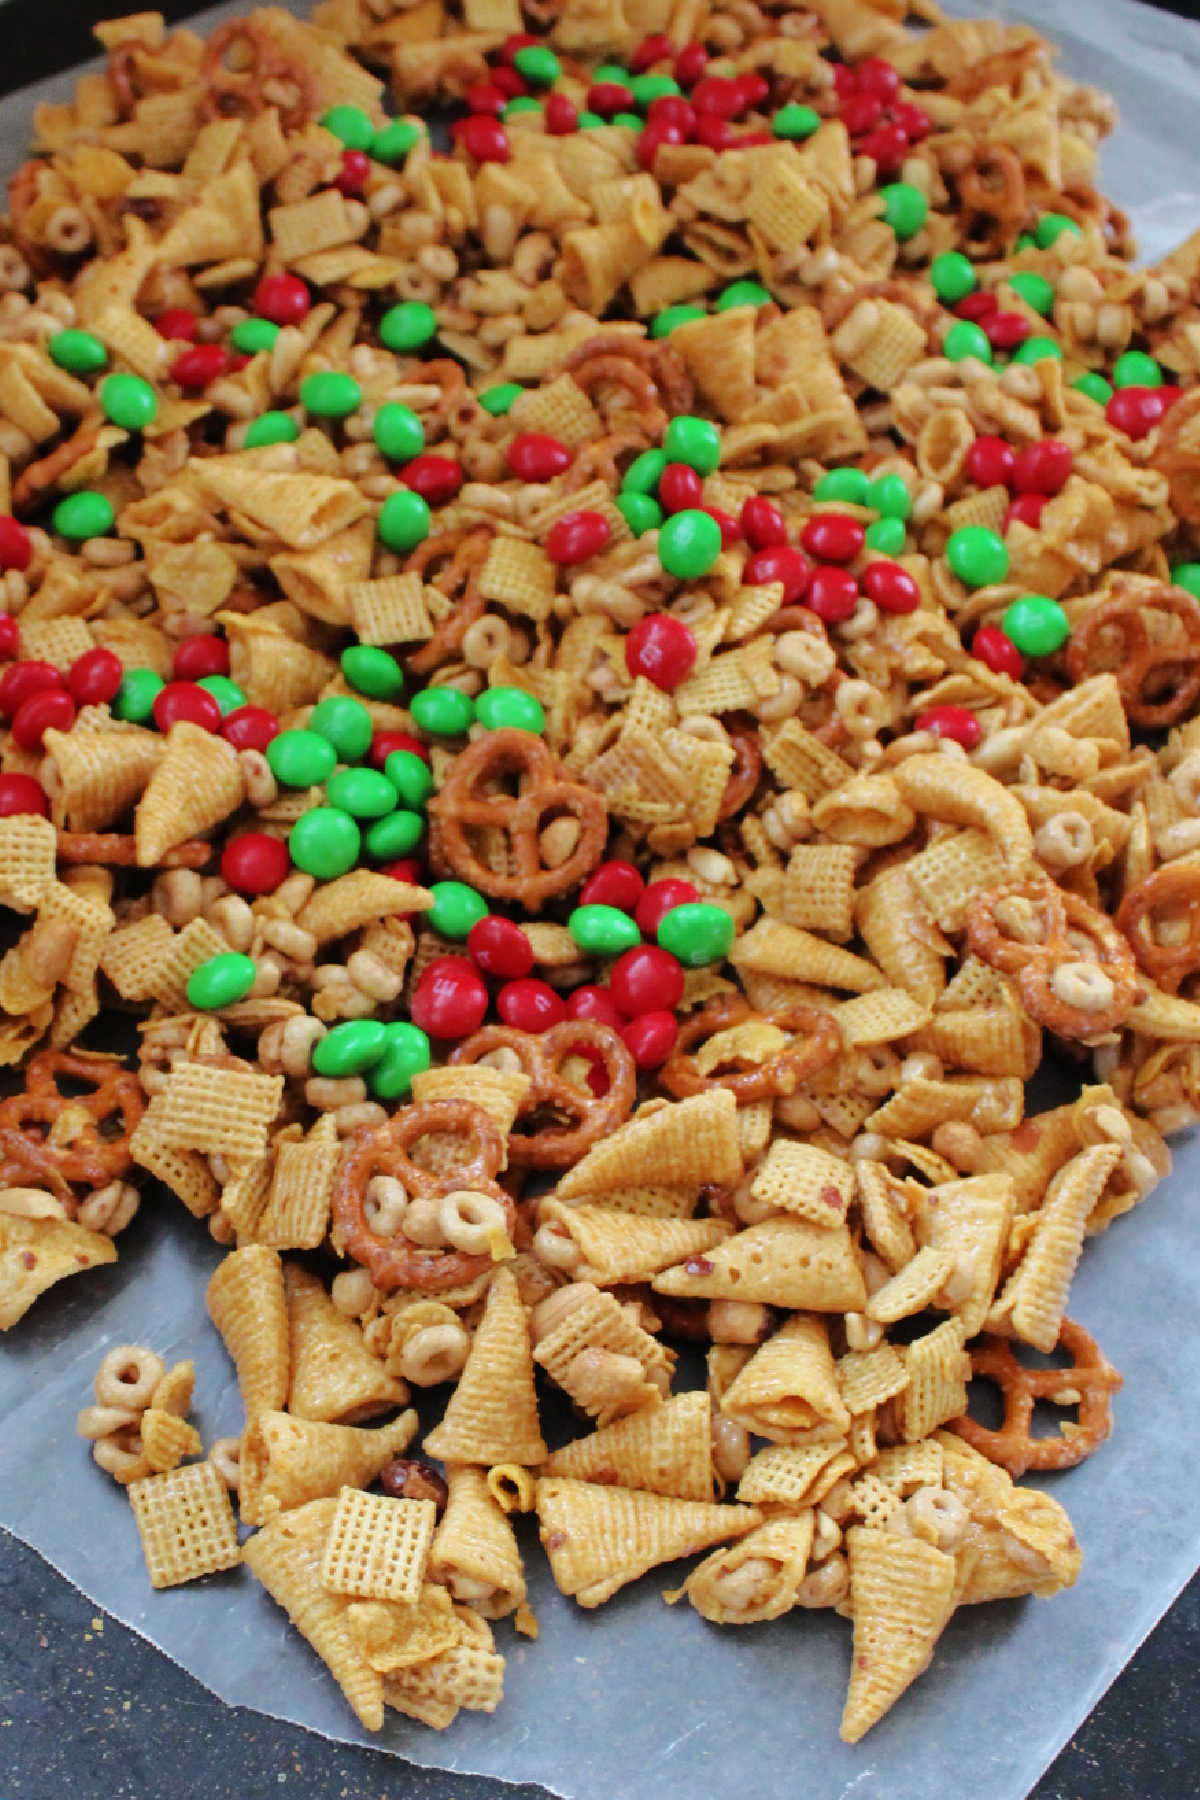 Caramel snack mix with bugles, pretzels and more coated in caramel mixture and cooked until crunchy cooling on wax paper.